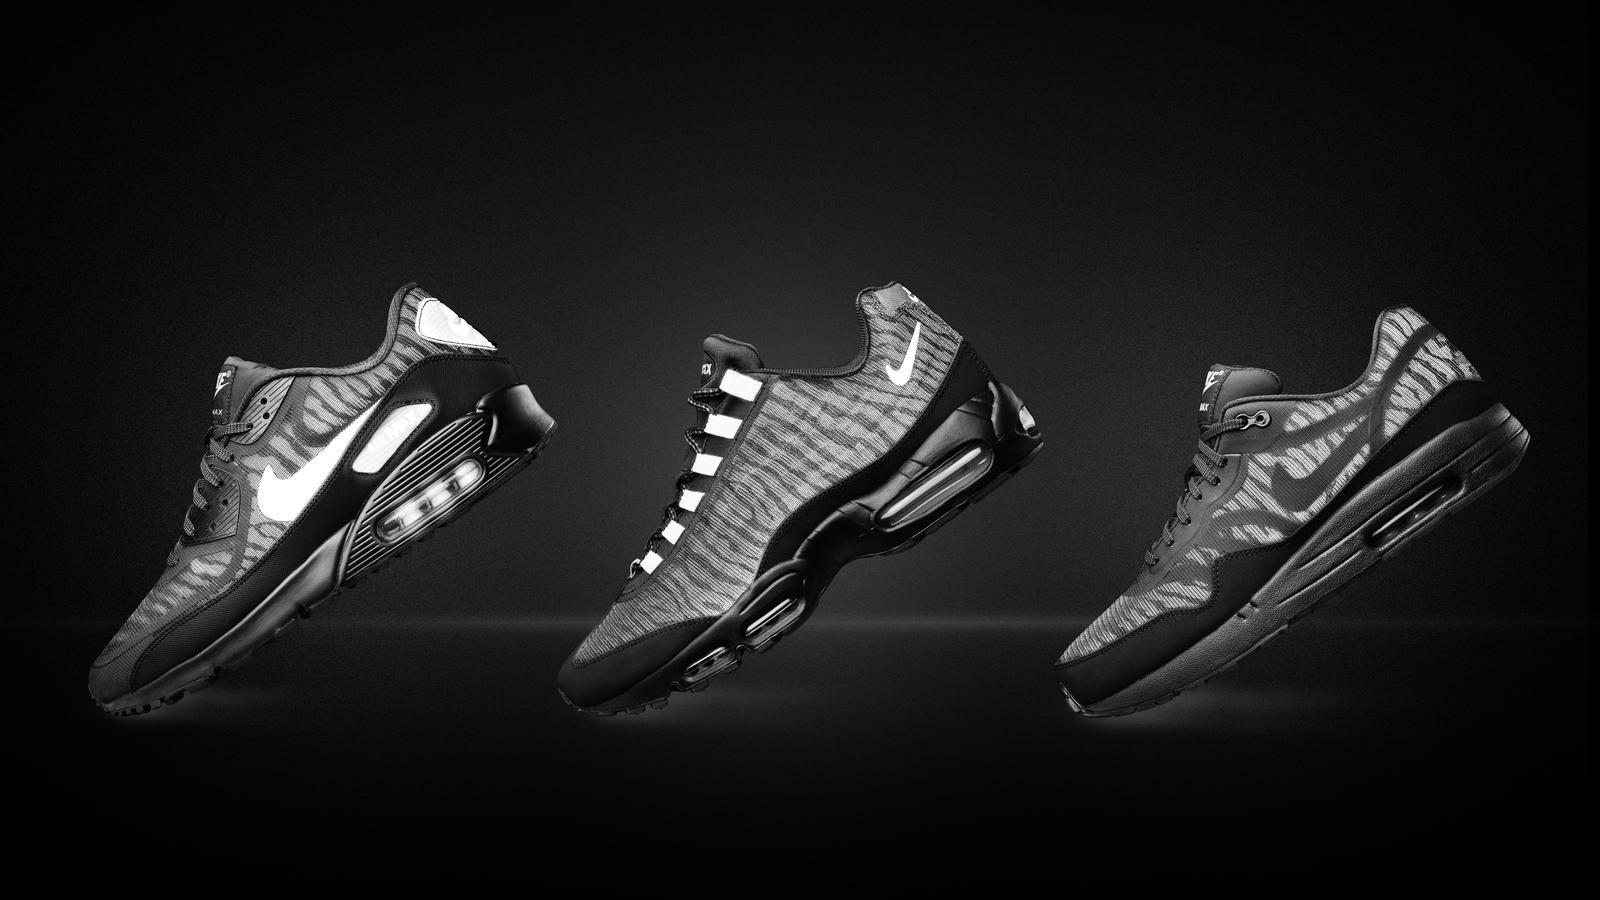 The Nike Air Max Reflect Collection: One Shoe, Both Sides